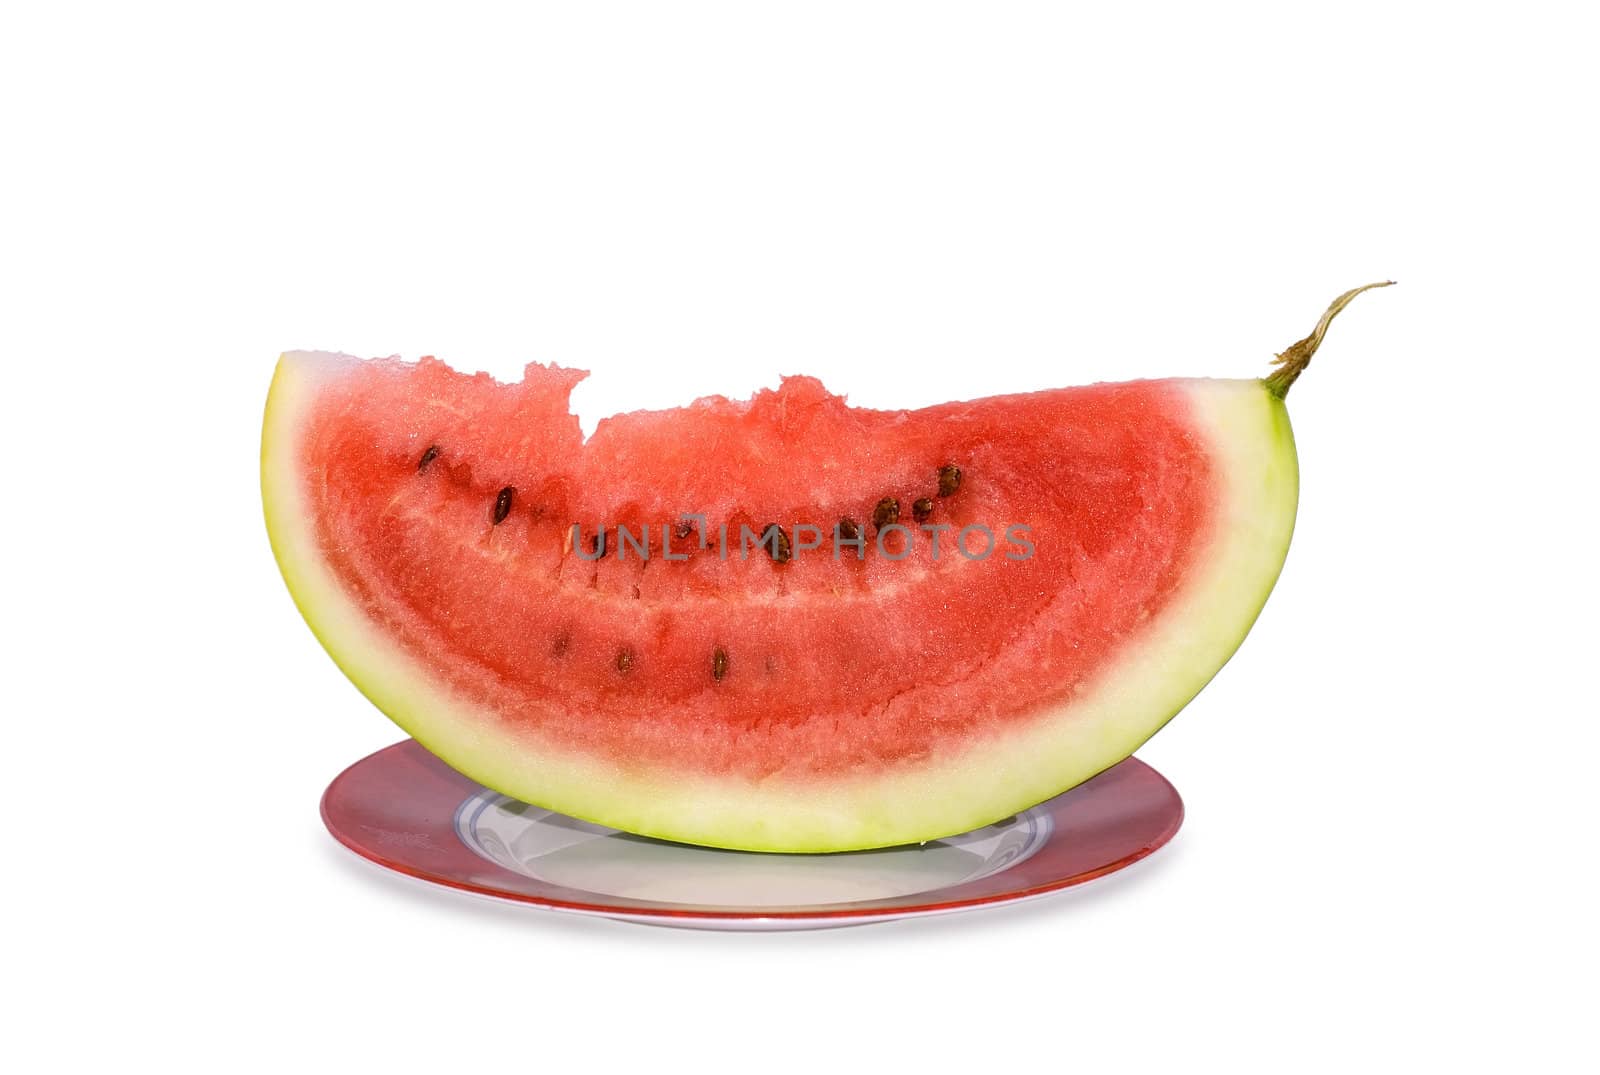 Watermelon and crusts on a plate isolated on a white background